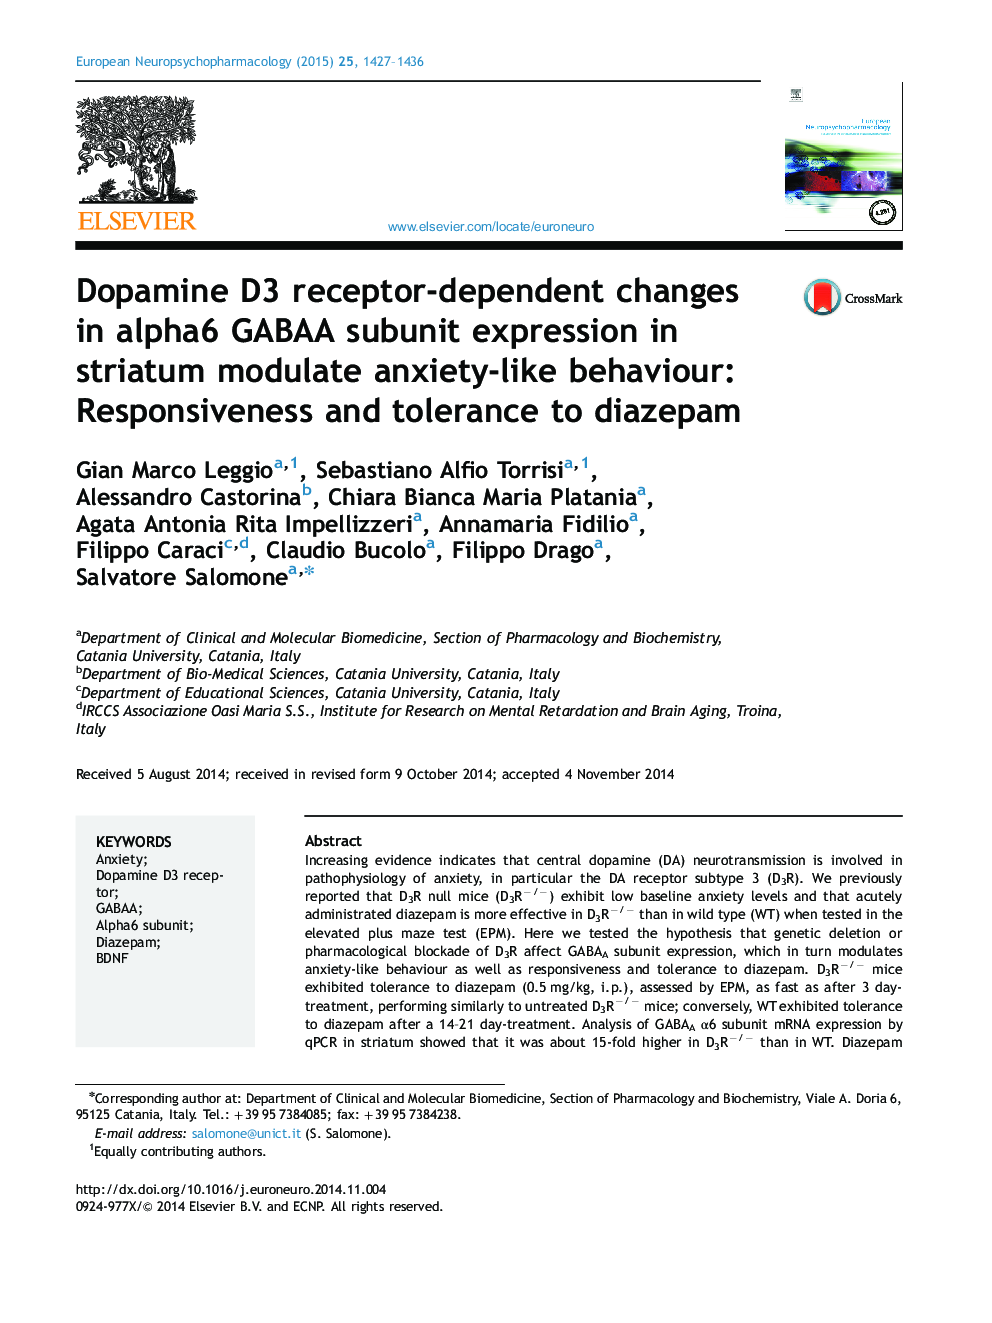 Dopamine D3 receptor-dependent changes in alpha6 GABAA subunit expression in striatum modulate anxiety-like behaviour: Responsiveness and tolerance to diazepam